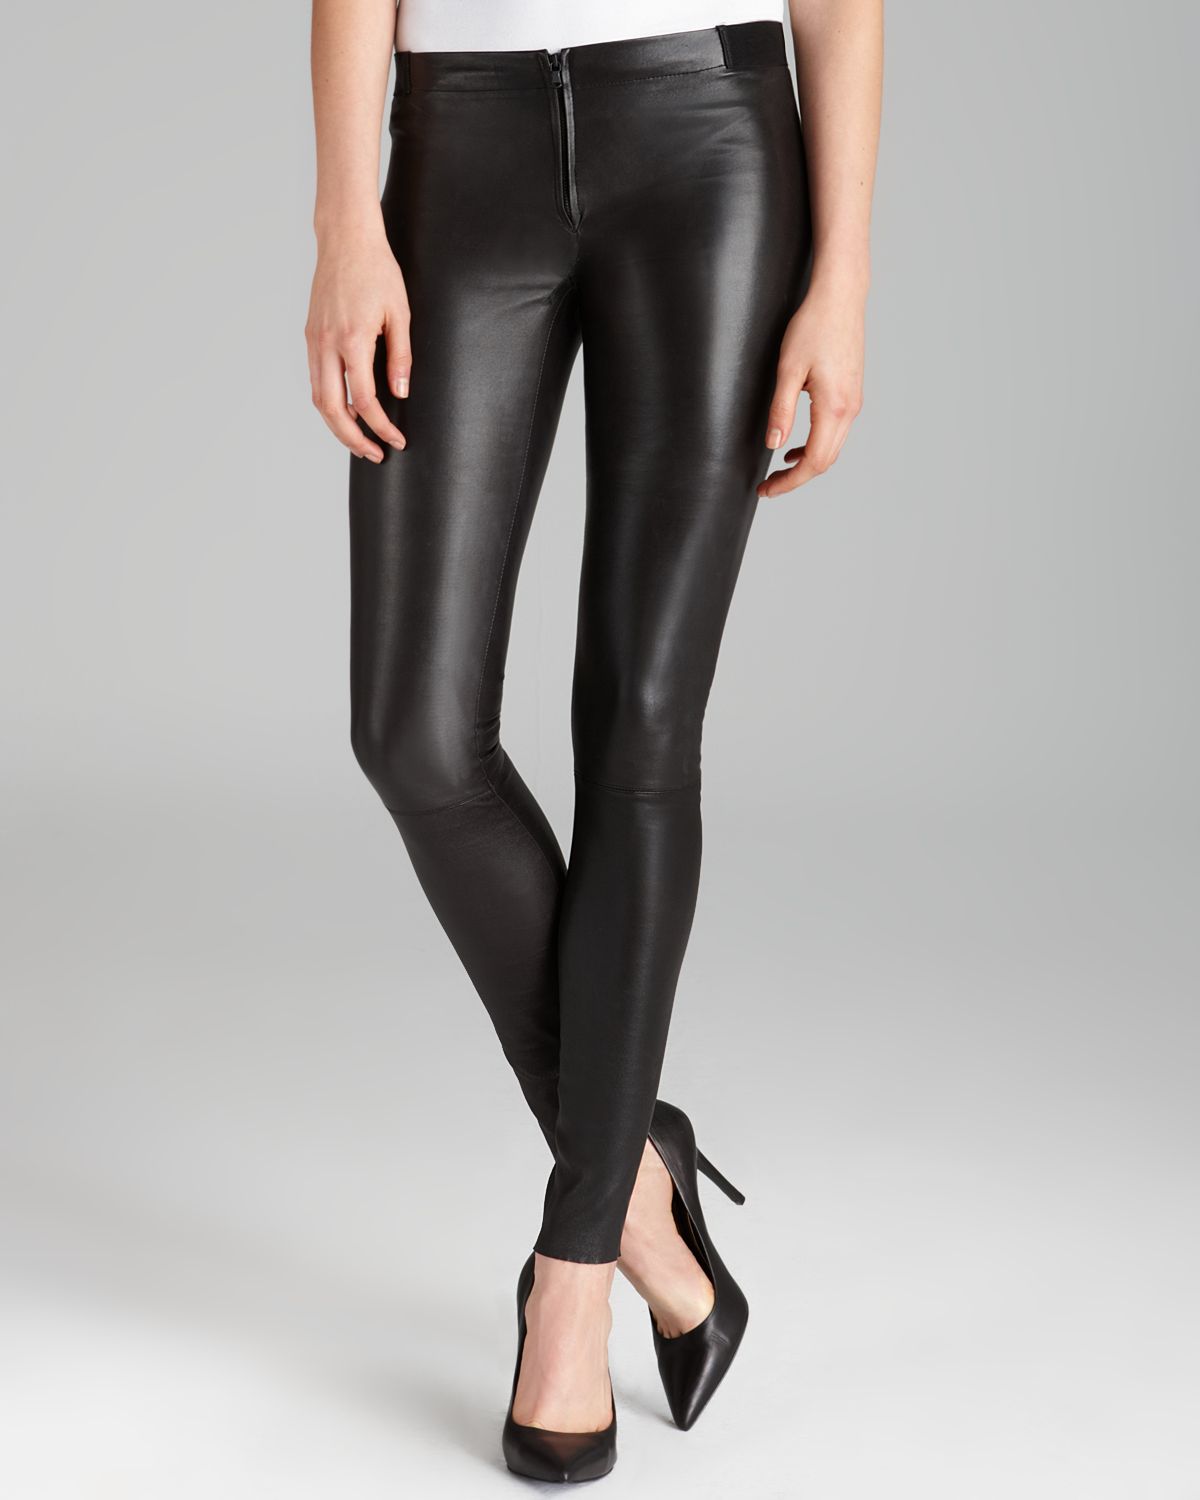 Statement Pants - Wide-leg Cargo Trousers & Jeans | Alice + Olivia